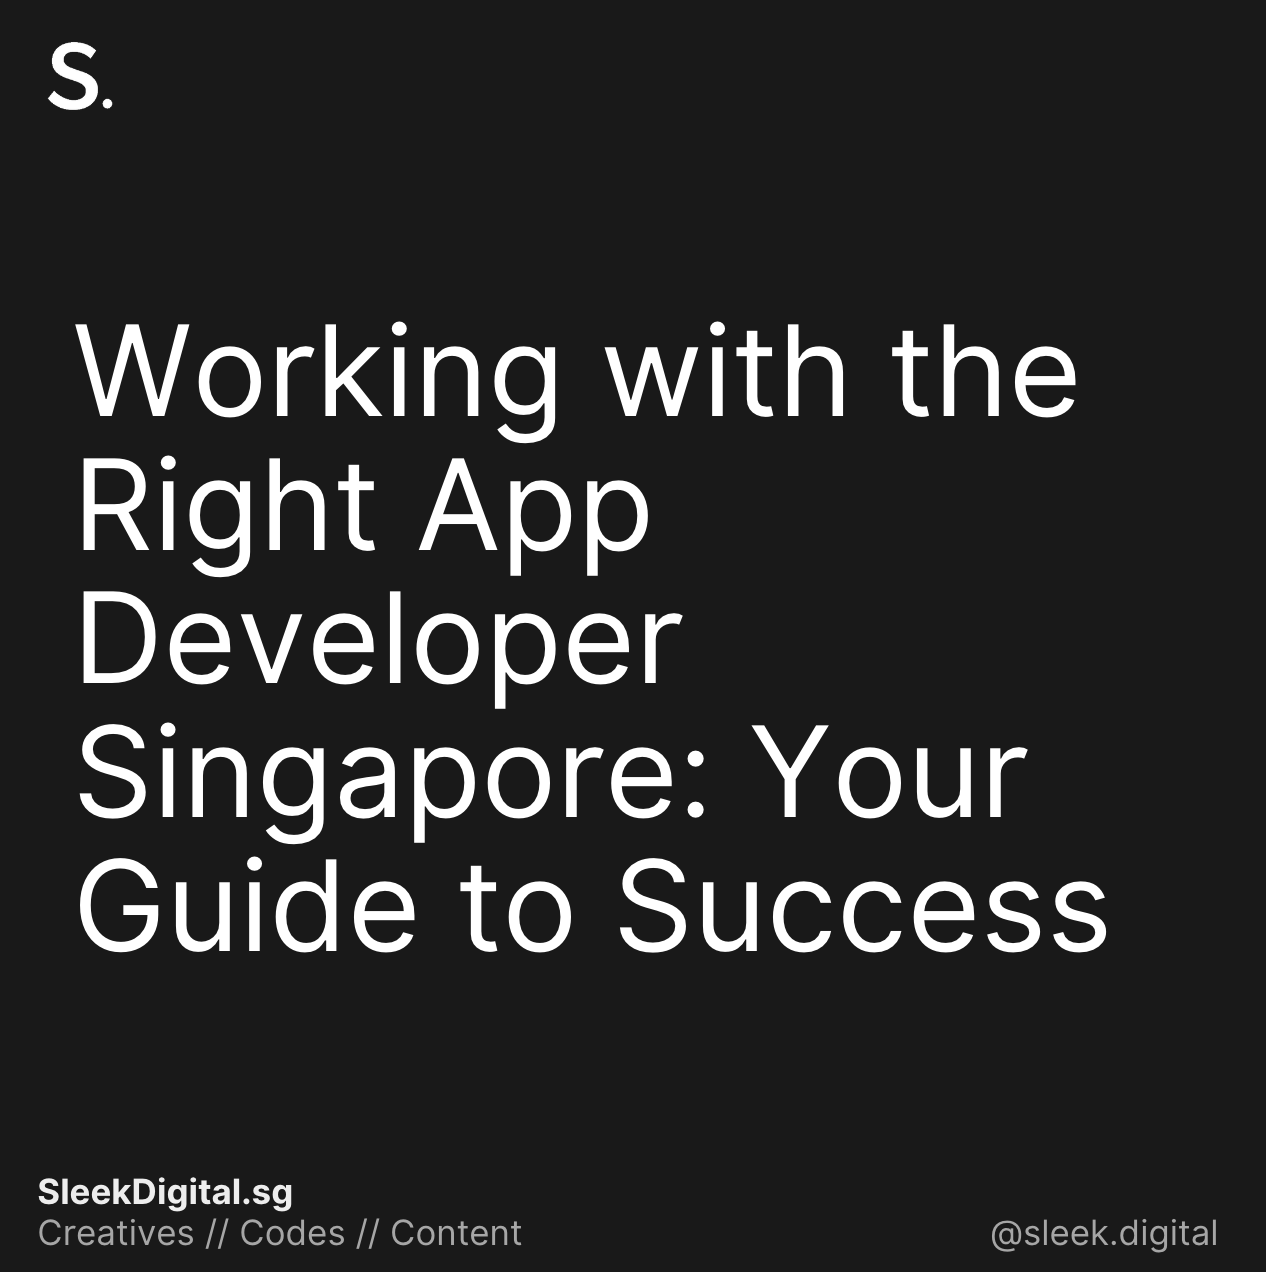 Working with the Right App Developer Singapore: Your Guide to Success